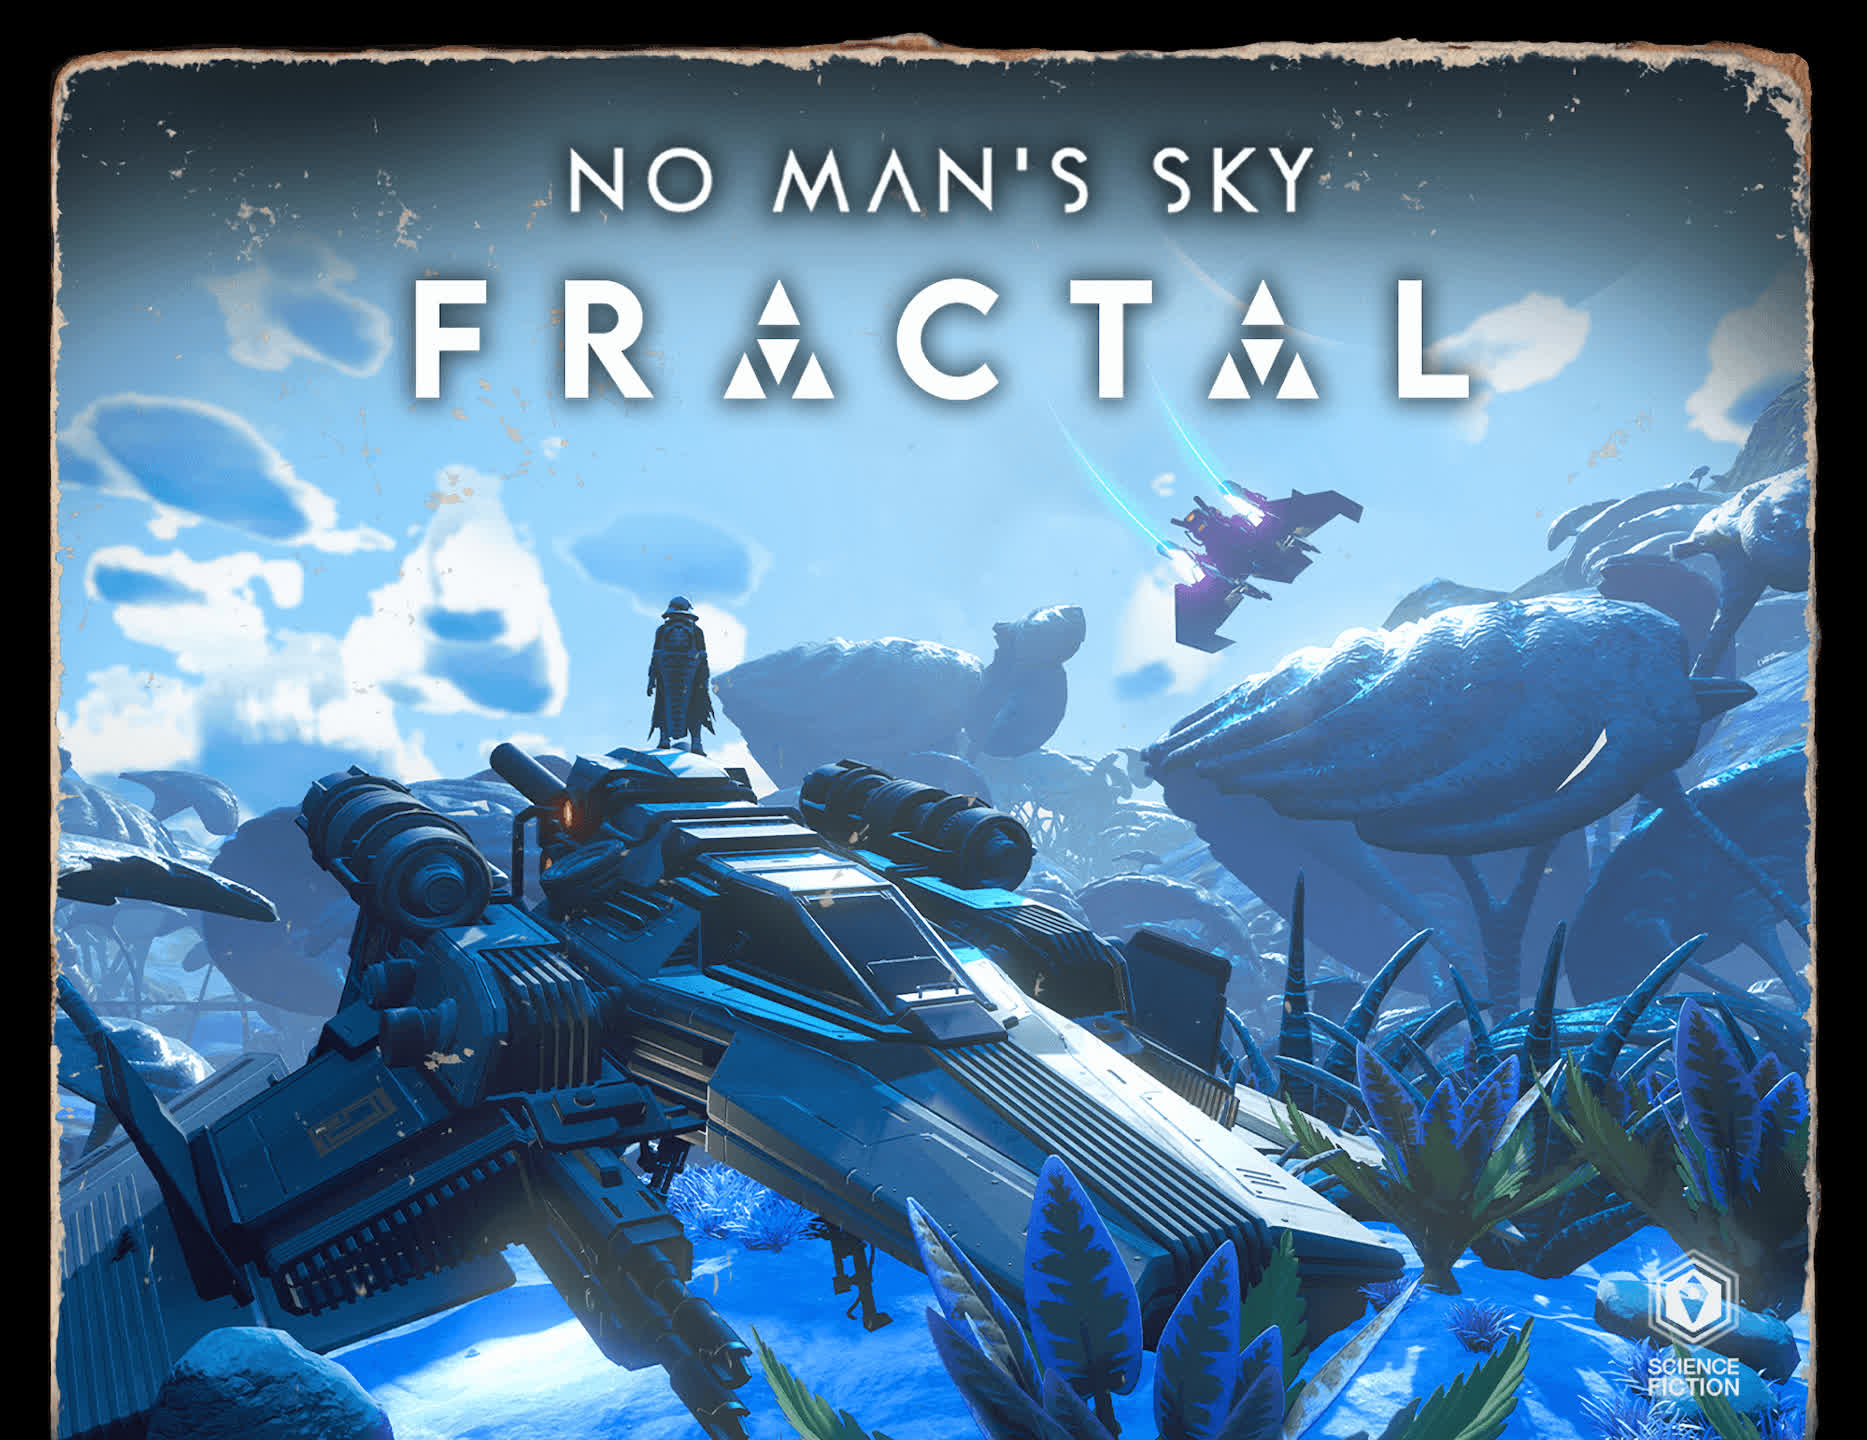 No Man's Sky Fractal update ushers in PS VR2 with a new expedition, visual improvements, and more